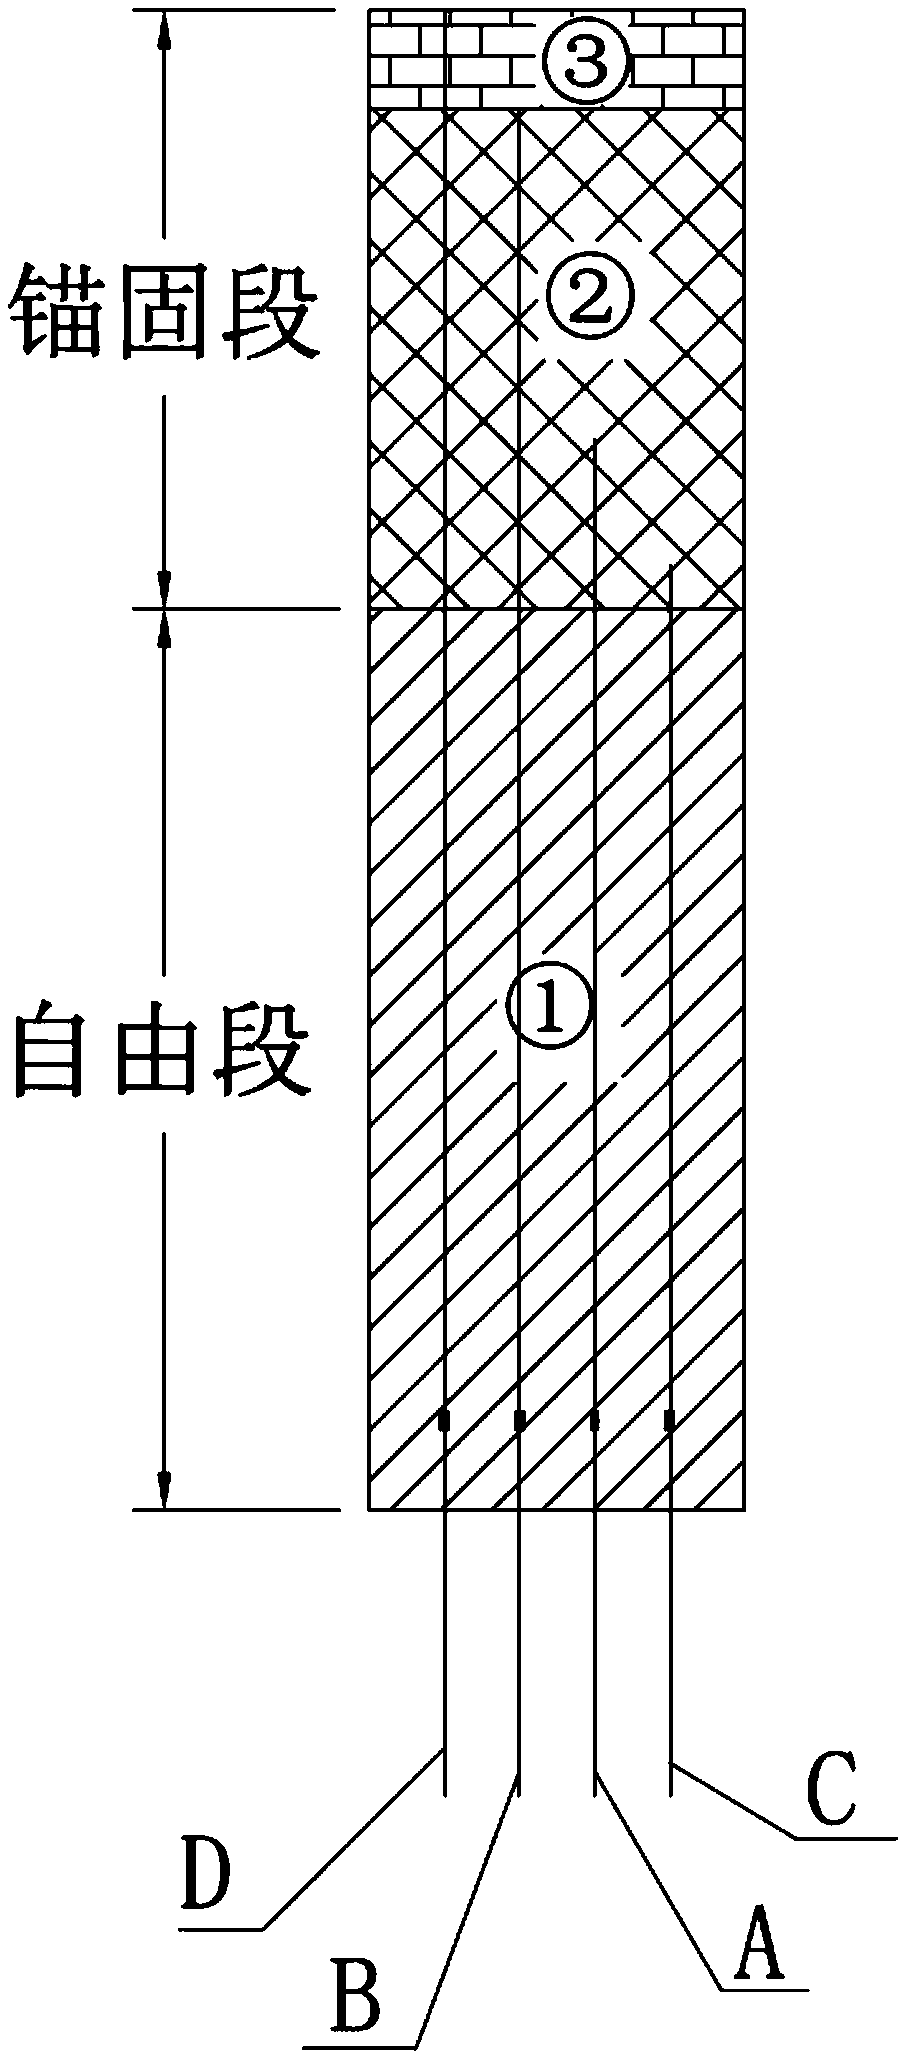 A grouting construction method for rapidly tensioning anchor cables